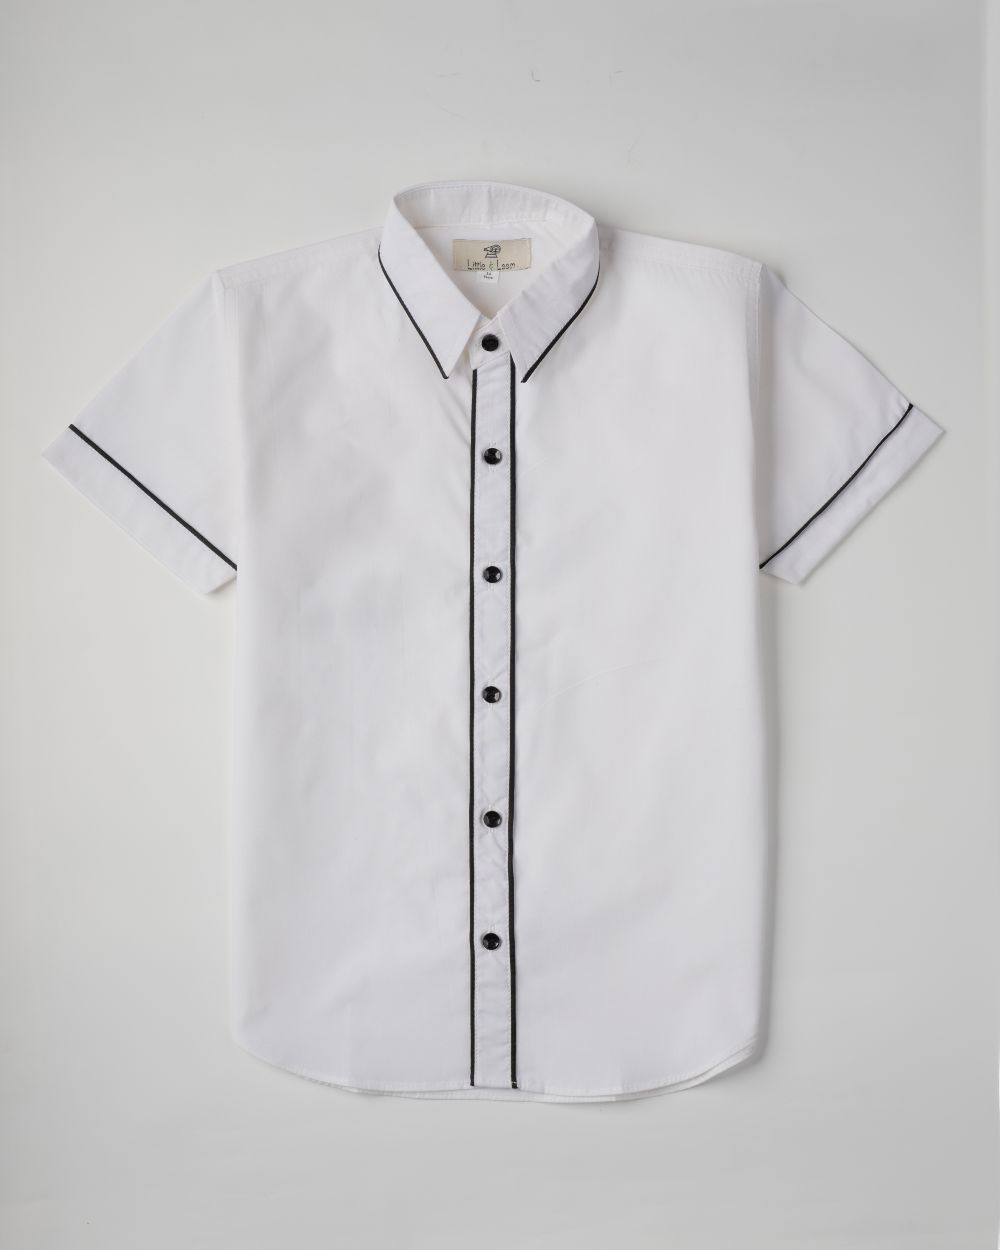 WHITE SHIRT WITH BLACK PIPPING